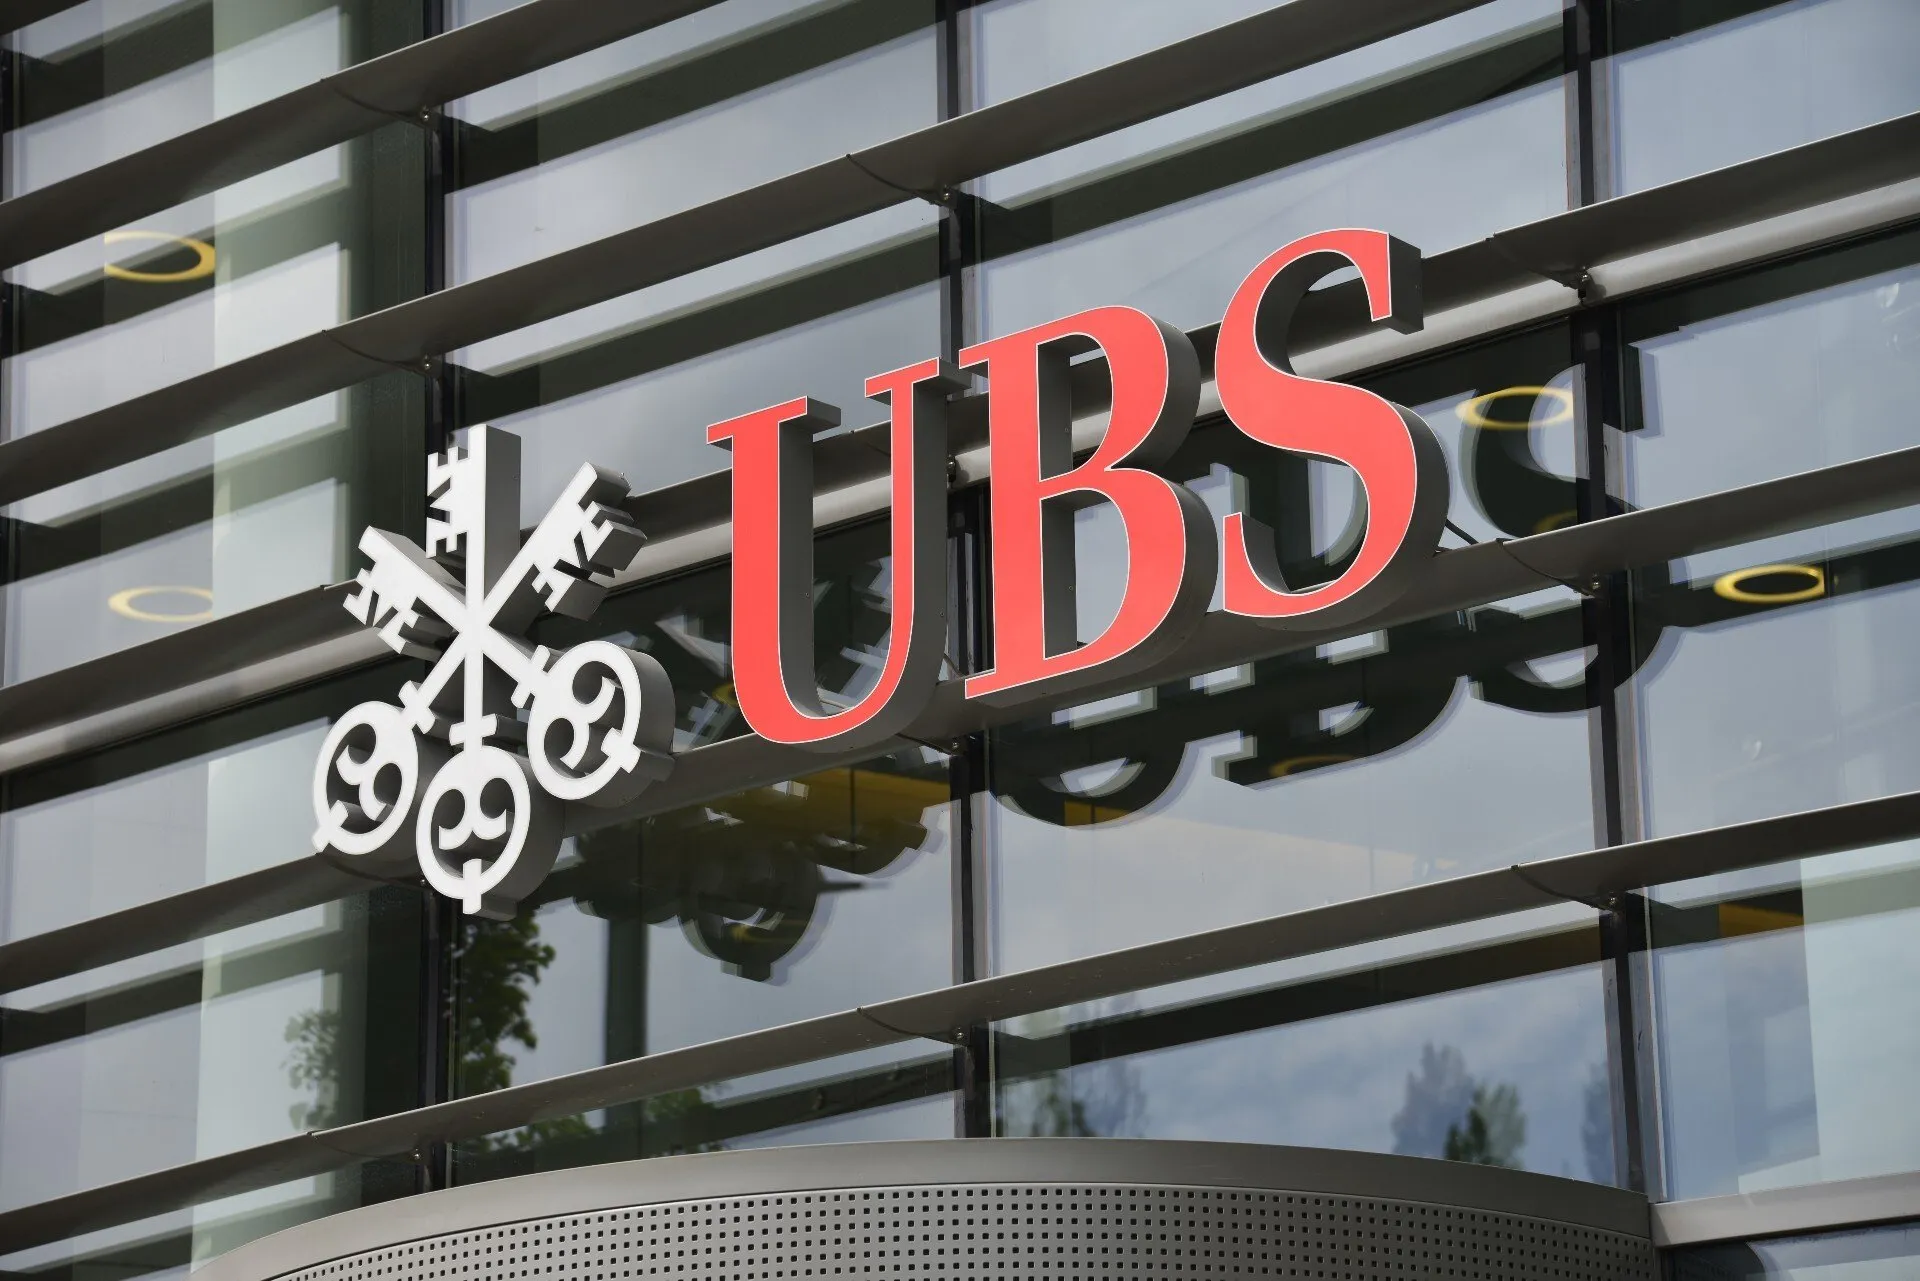 UBS is Switzerland’s largest private bank. Image: Shutterstock.